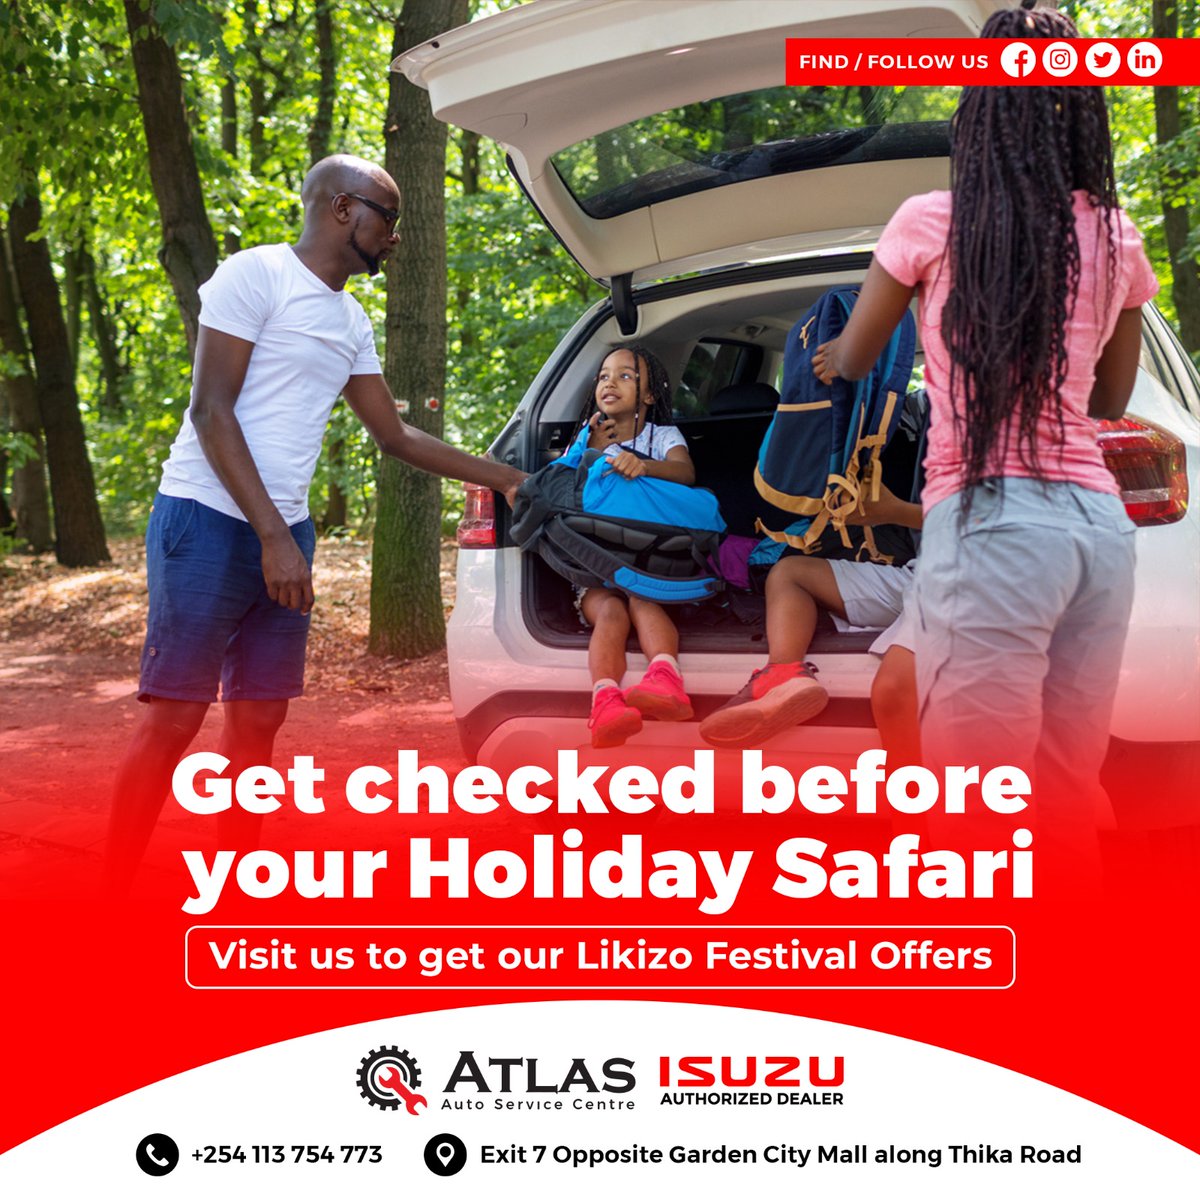 🚙🌄 Before your holiday safari, get checked @Atlasautocentre. Unveil amazing Likizo Festival offers and embark on a journey with peace of mind. Let the adventure begin! 🛠️🔍#howcanwehelp #HolidaySafari #LikizoFestival #CarCheckUp #AtlasAutoService